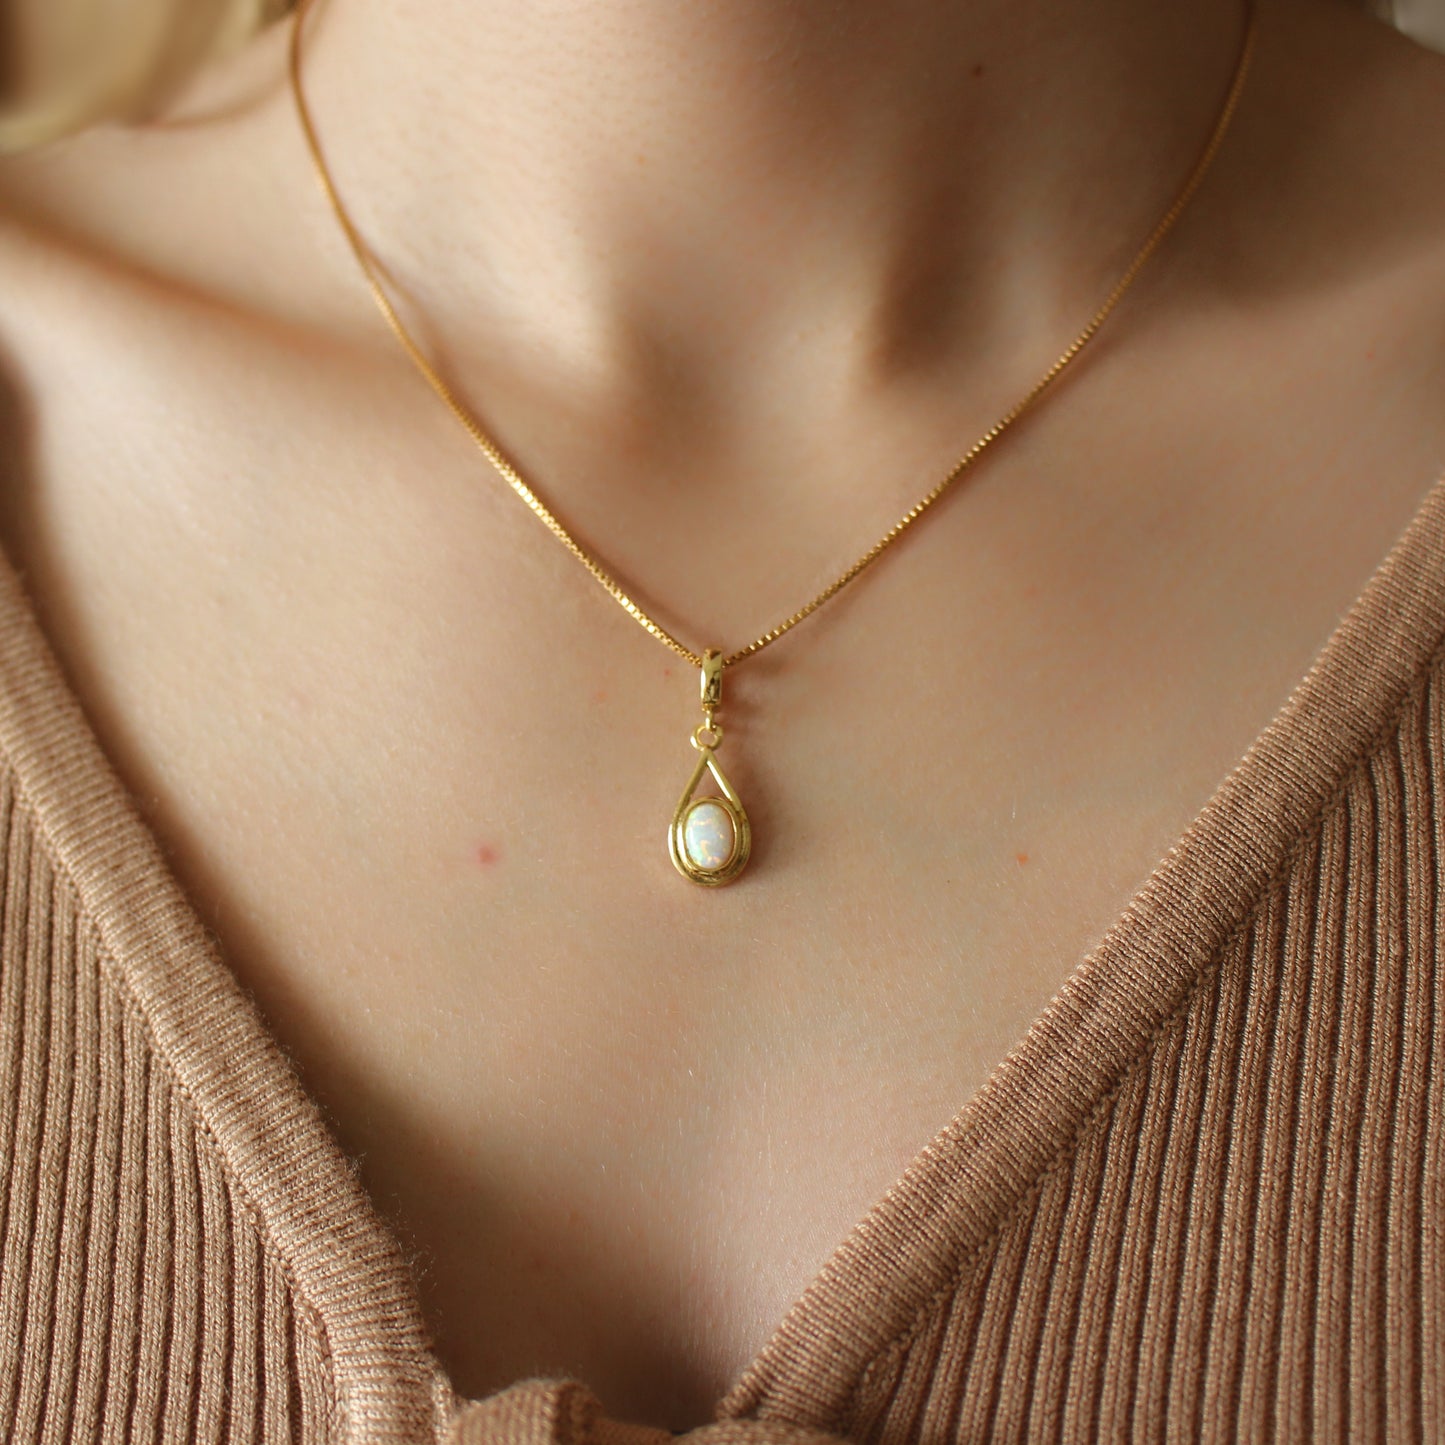 White opal pendant and 14Kt Gold Filled necklace ∙ Oval teardrop bezel opal ∙ Necklace for women ∙ Birthstone Gift